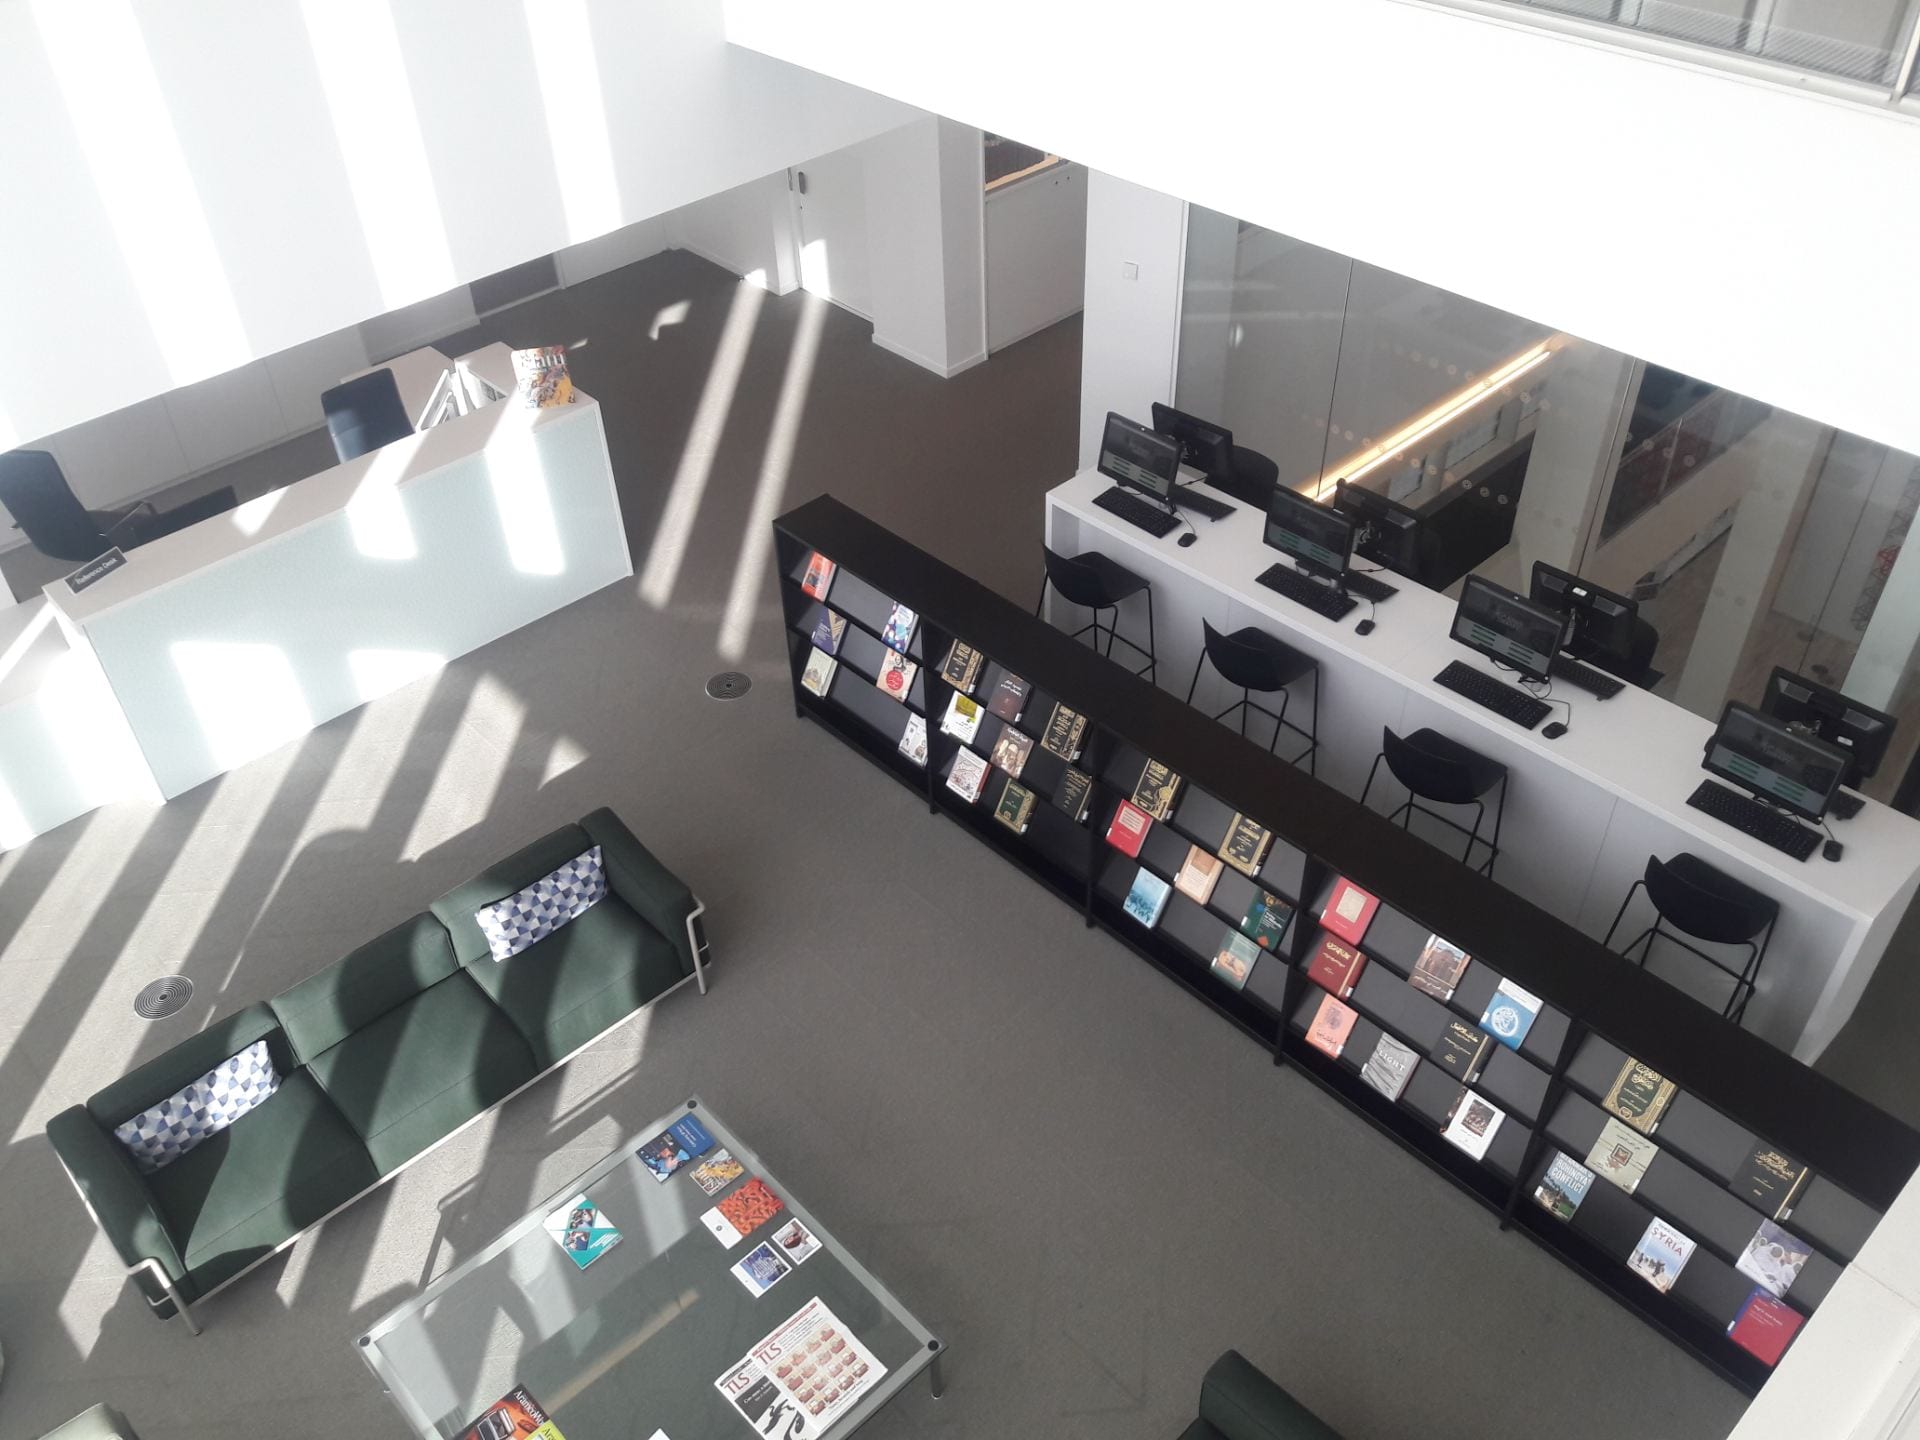 The entrance area of the Aga Khan Library taken from the floor above. The Library Help desk, soft furnishing, coffee table, journal shelves and catalogues and stools can be seen. There is light streaming in.